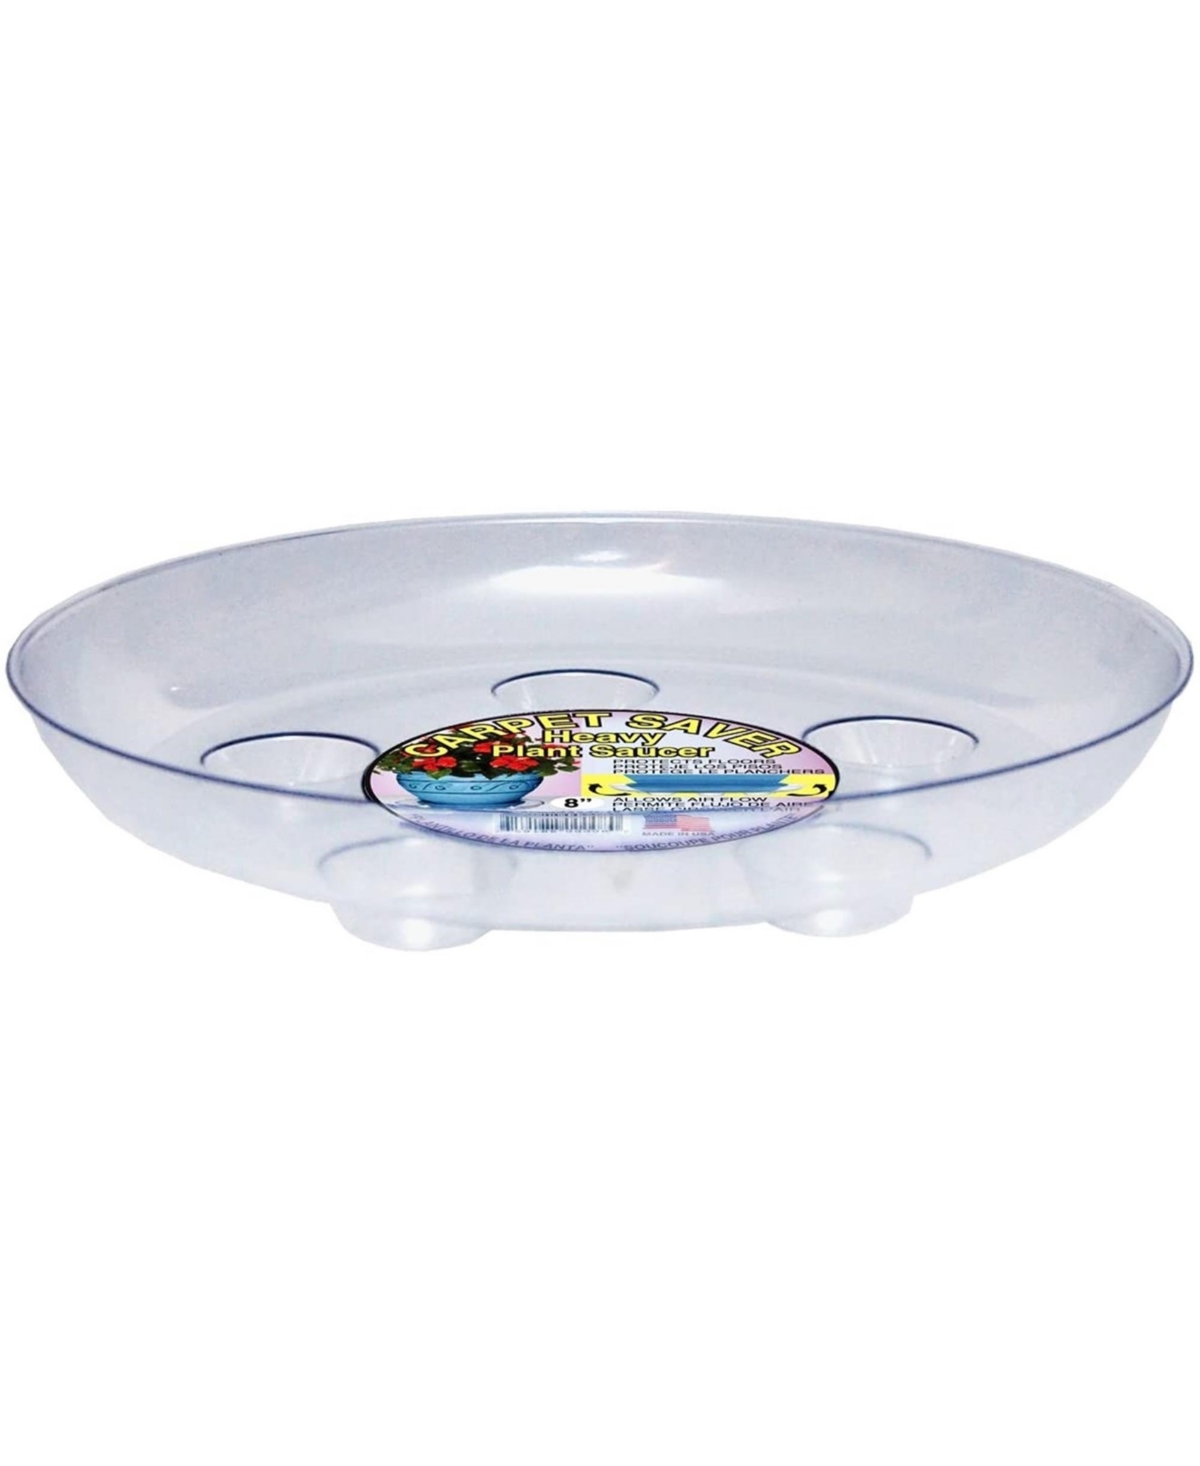 Ds-800 Heavy Gauge Footed Carpet Saver Saucer, 8-Inch, Clear - Clear